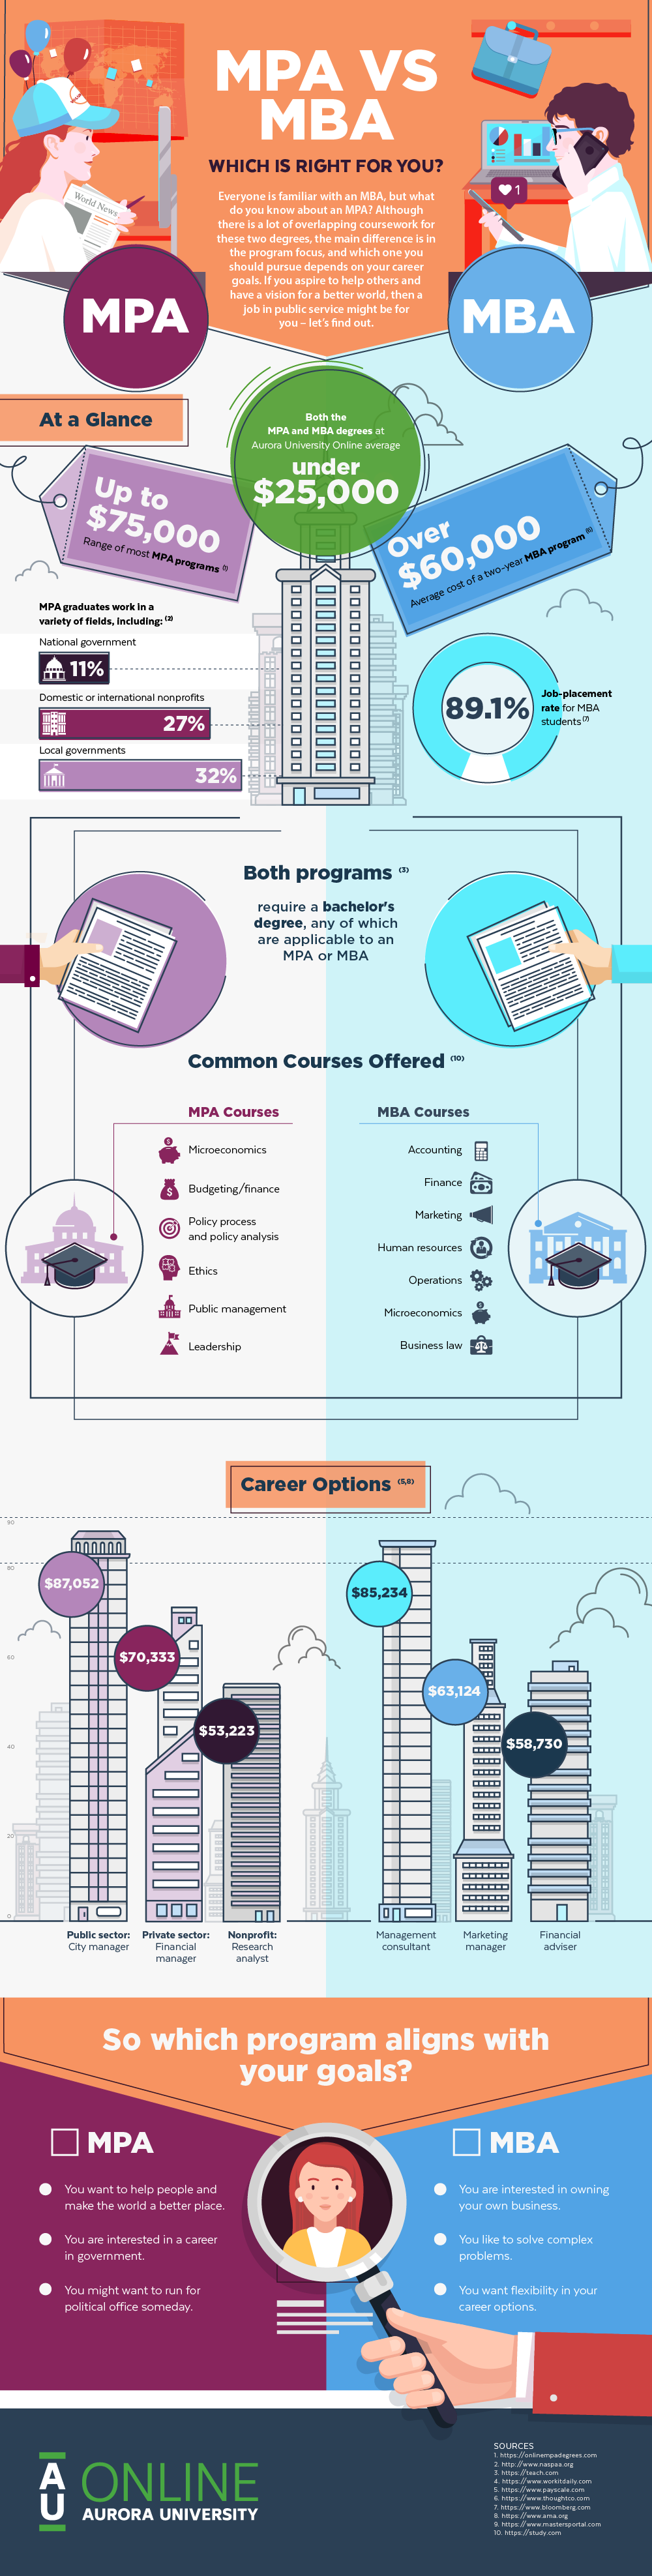 MPA vs MBA Infographic | AU Online